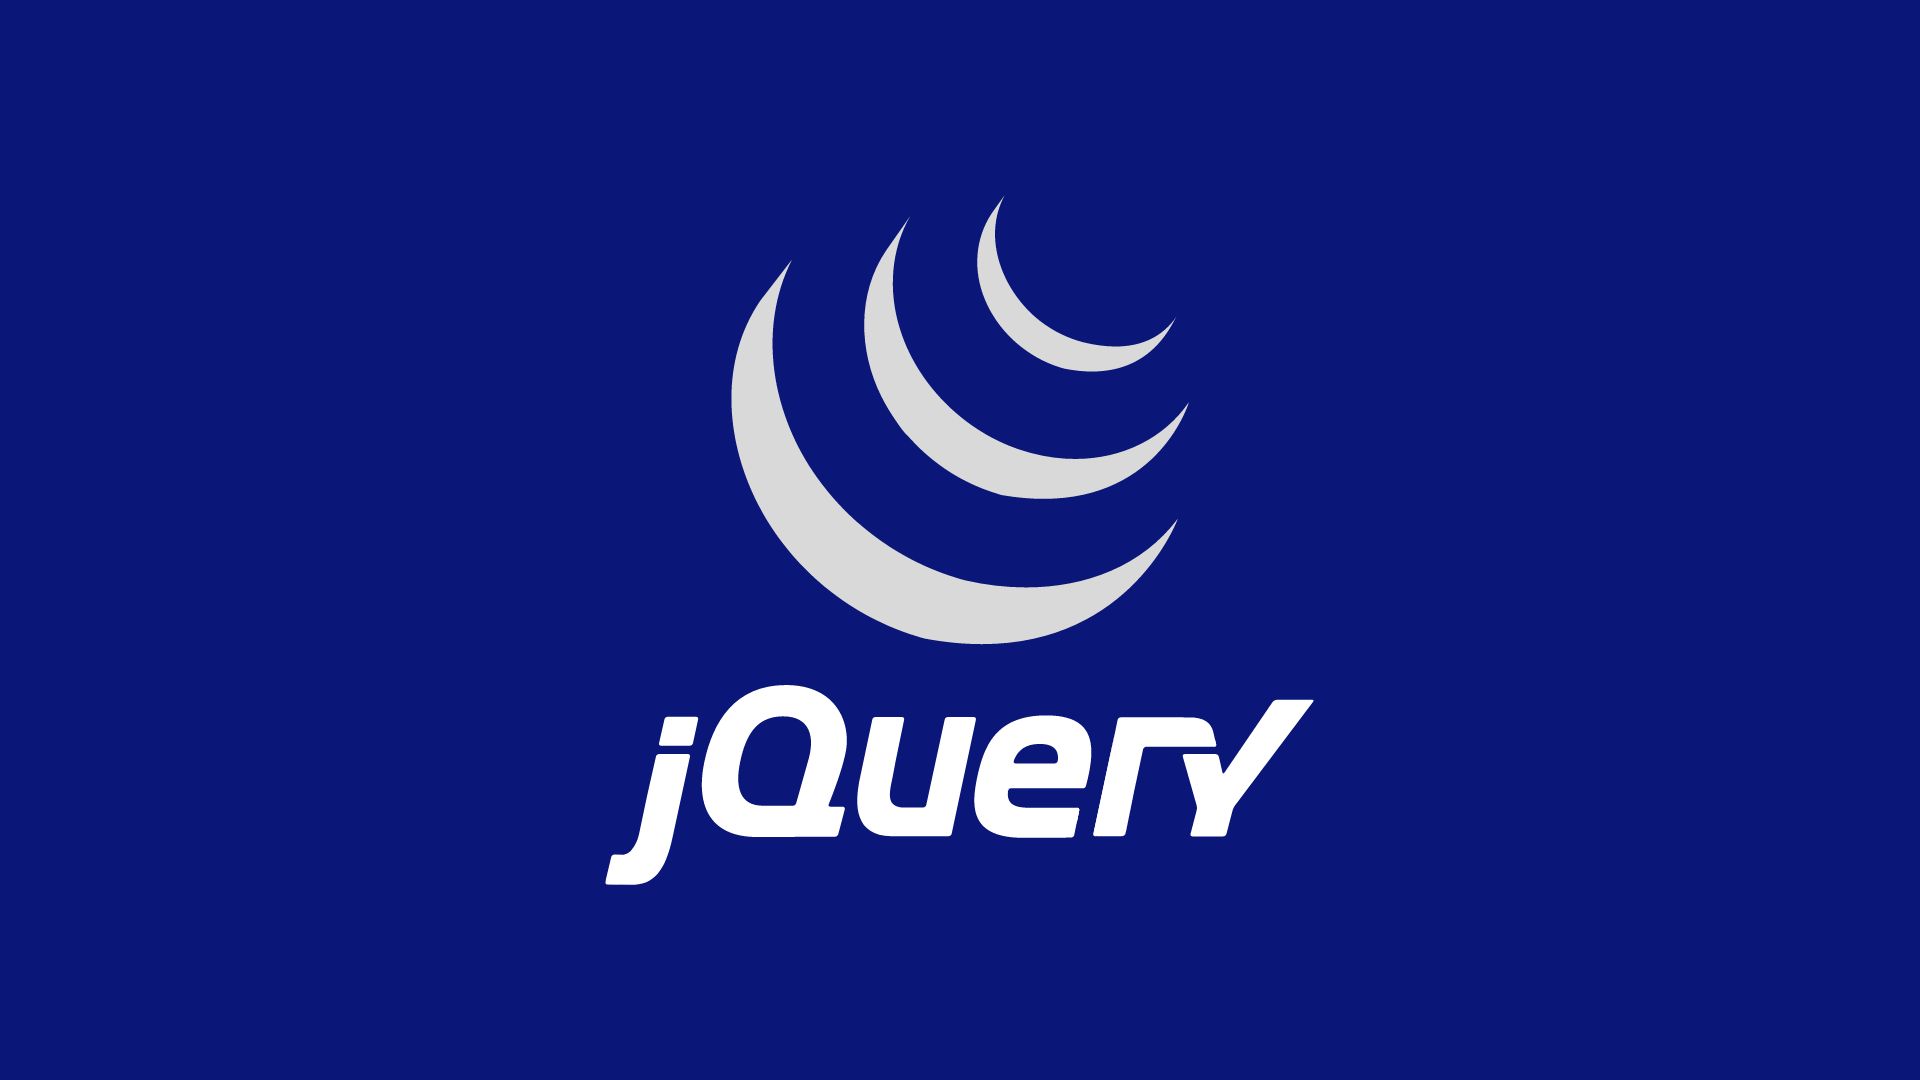 How to add jQuery to Shopify